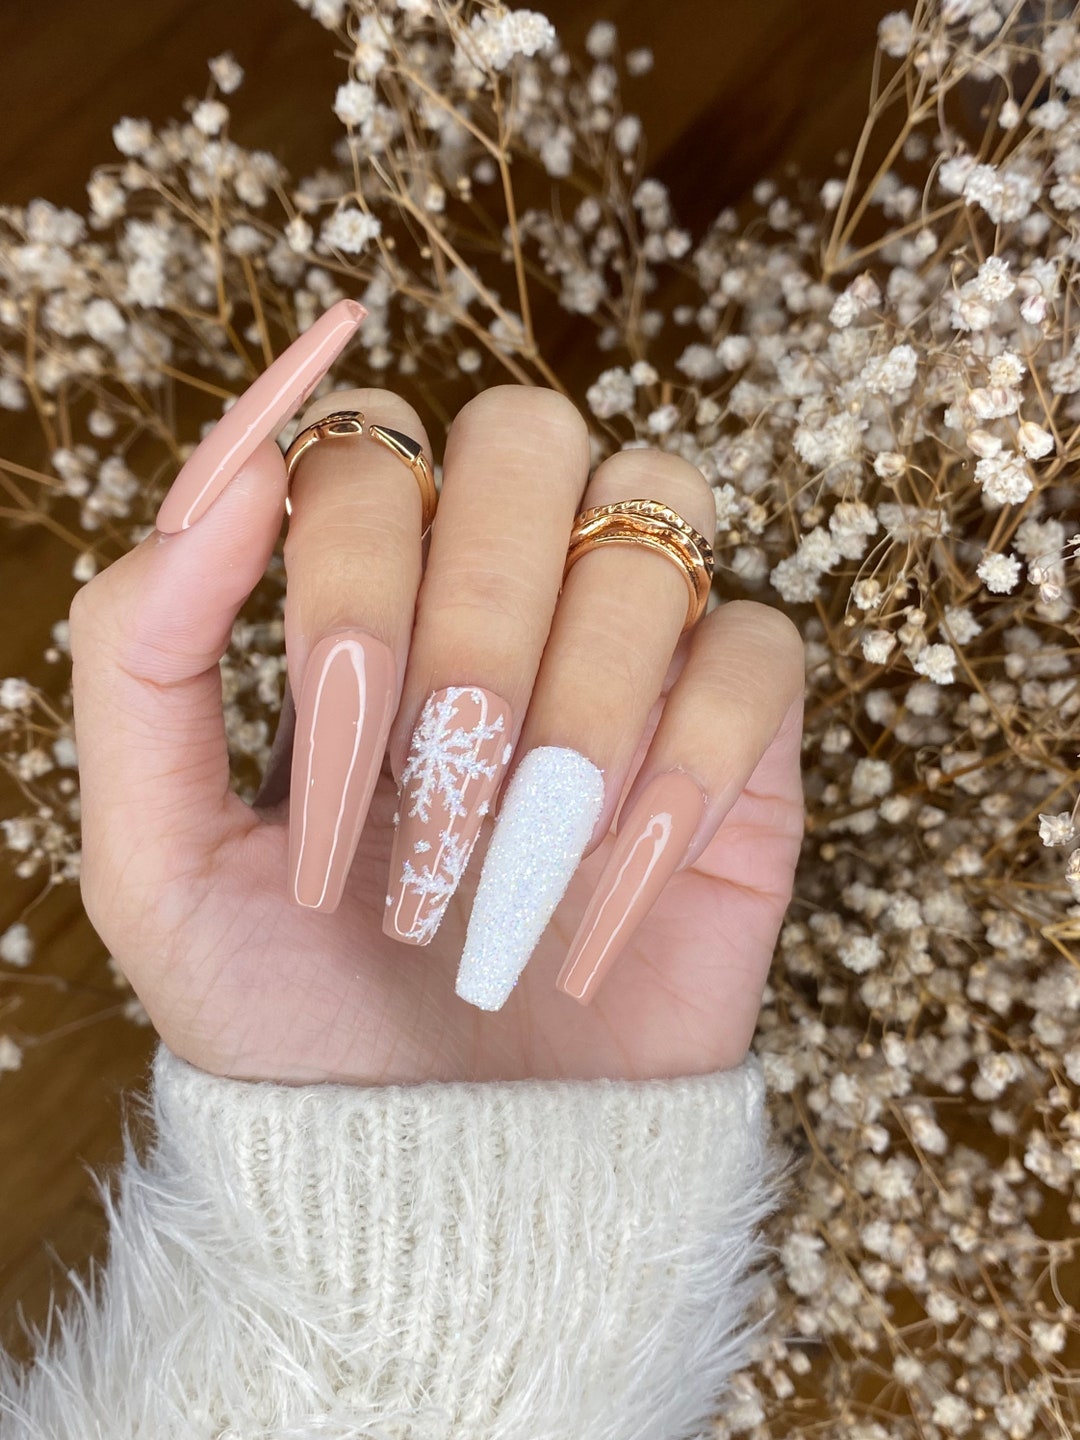 Winter Gold Snowflake Nail Art (With Real Gold!) - Nicole Loves Nails